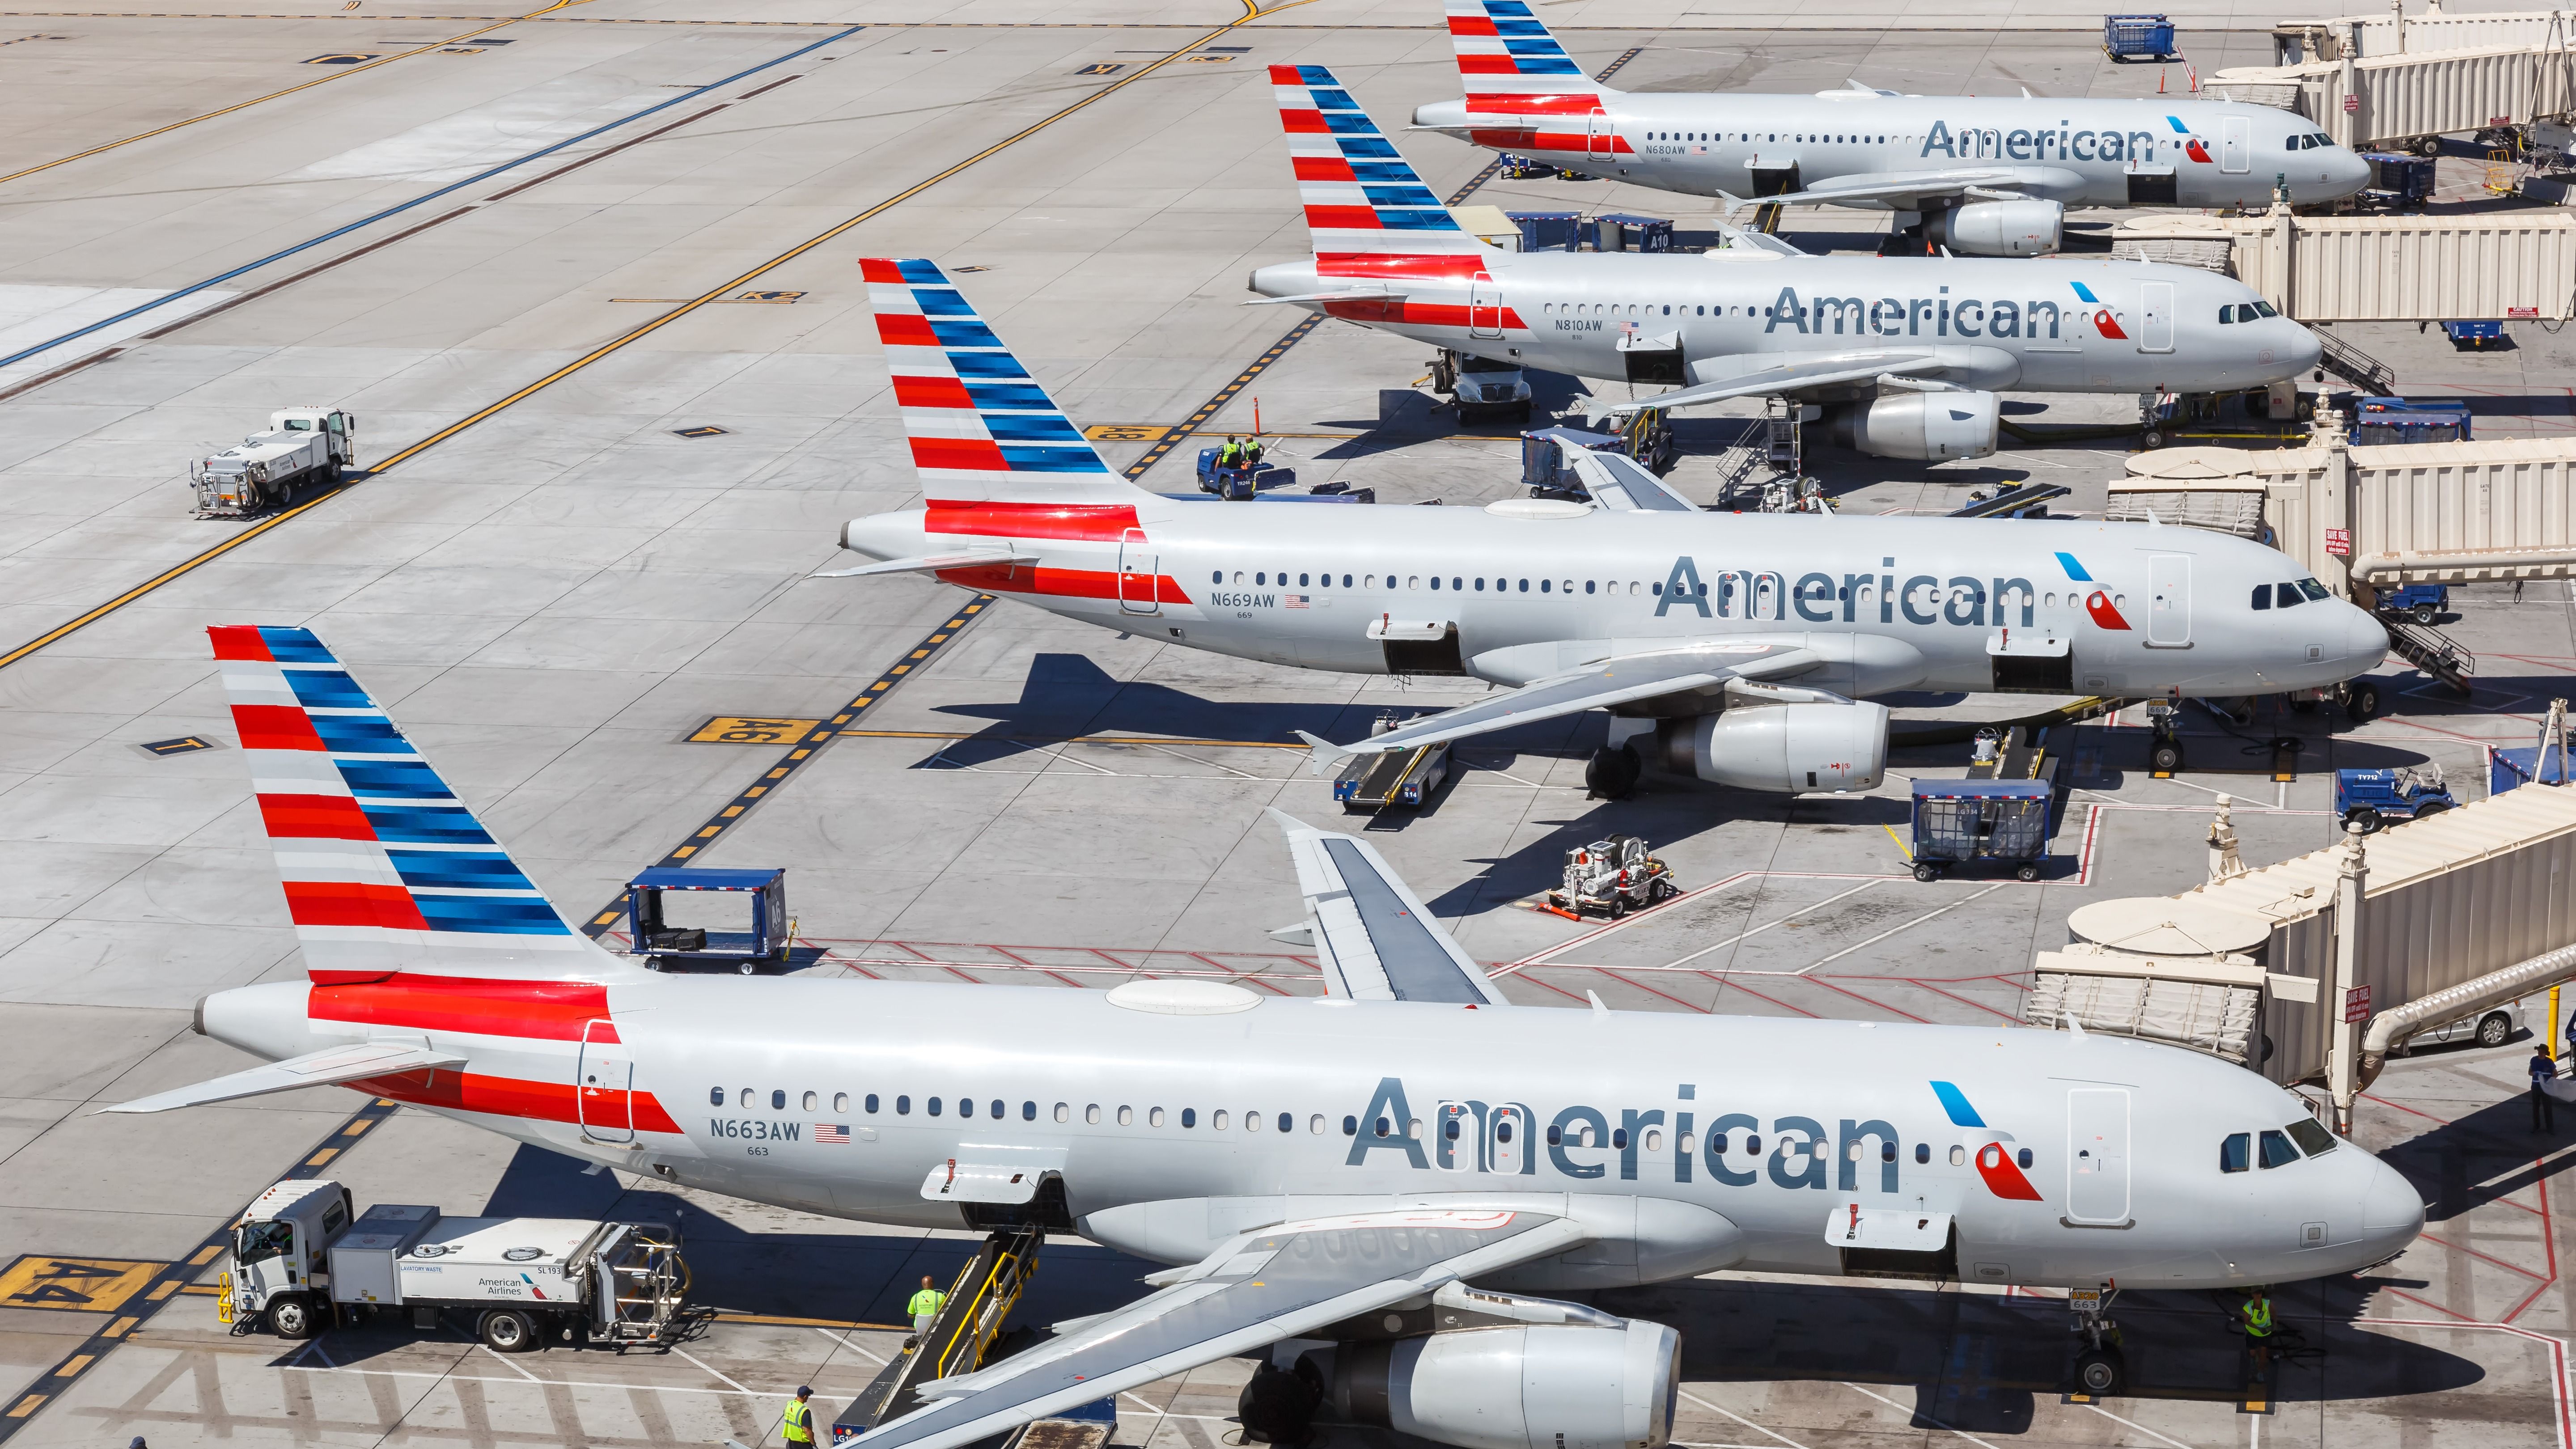 American Airlines Posts $931 Million Quarterly Loss - The New York Times